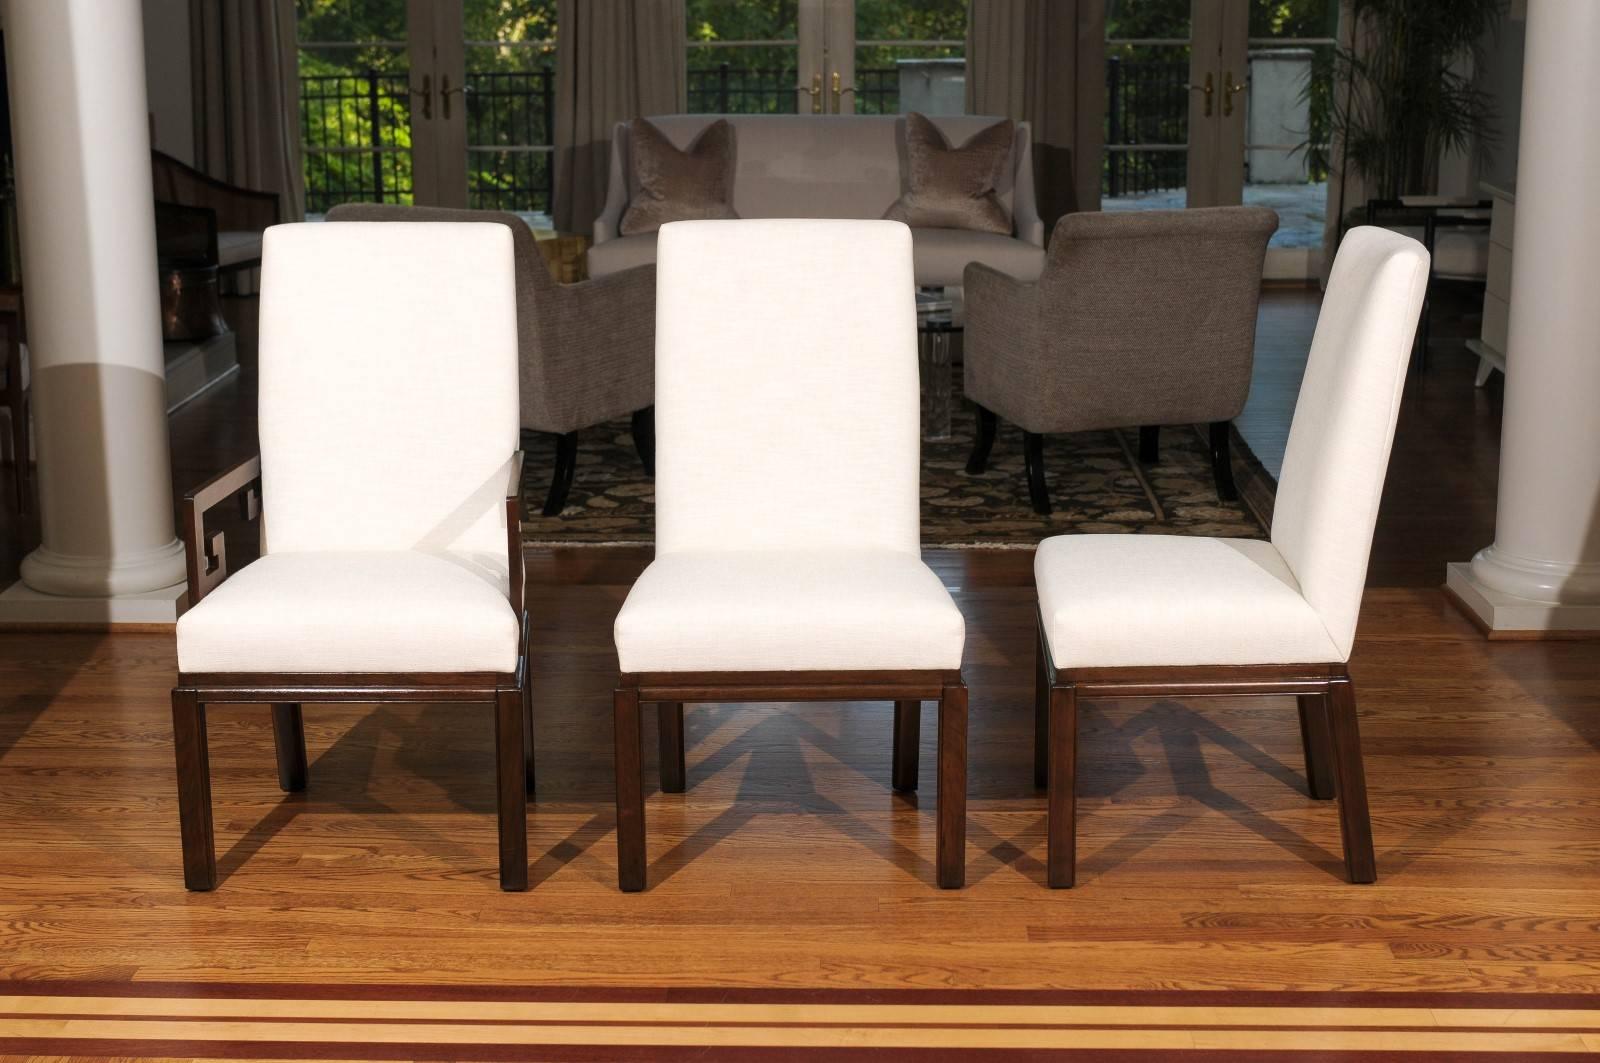 These magnificent dining chairs are shipped as professionally photographed and described in the listing narrative: Meticulously professionally restored and completely installation ready. This large set of rare seating examples is unique on the World